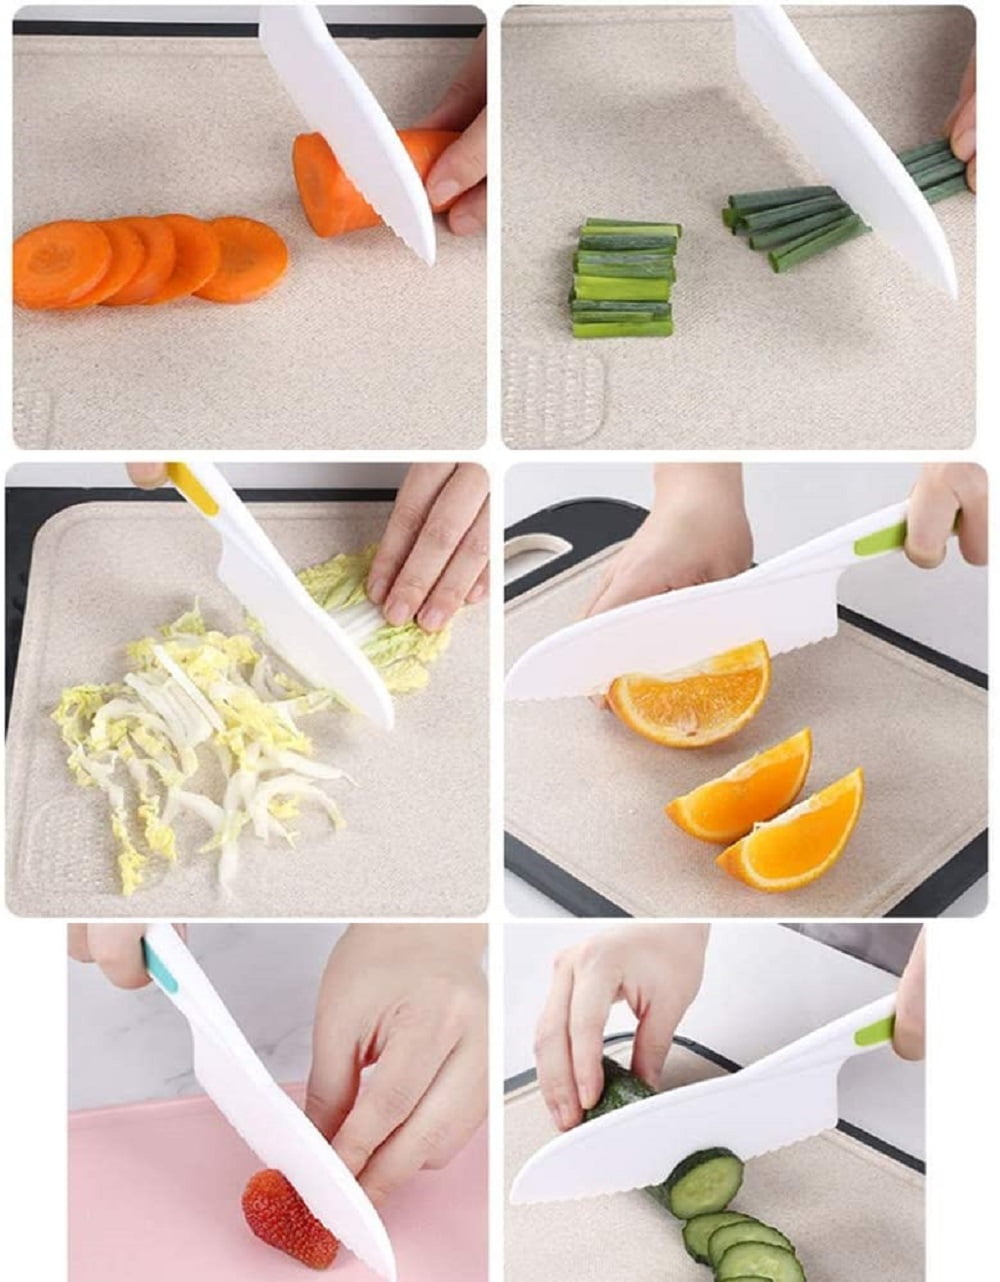 3-piece Children's Plastic Fruit Knife Durable Affordable Birthday